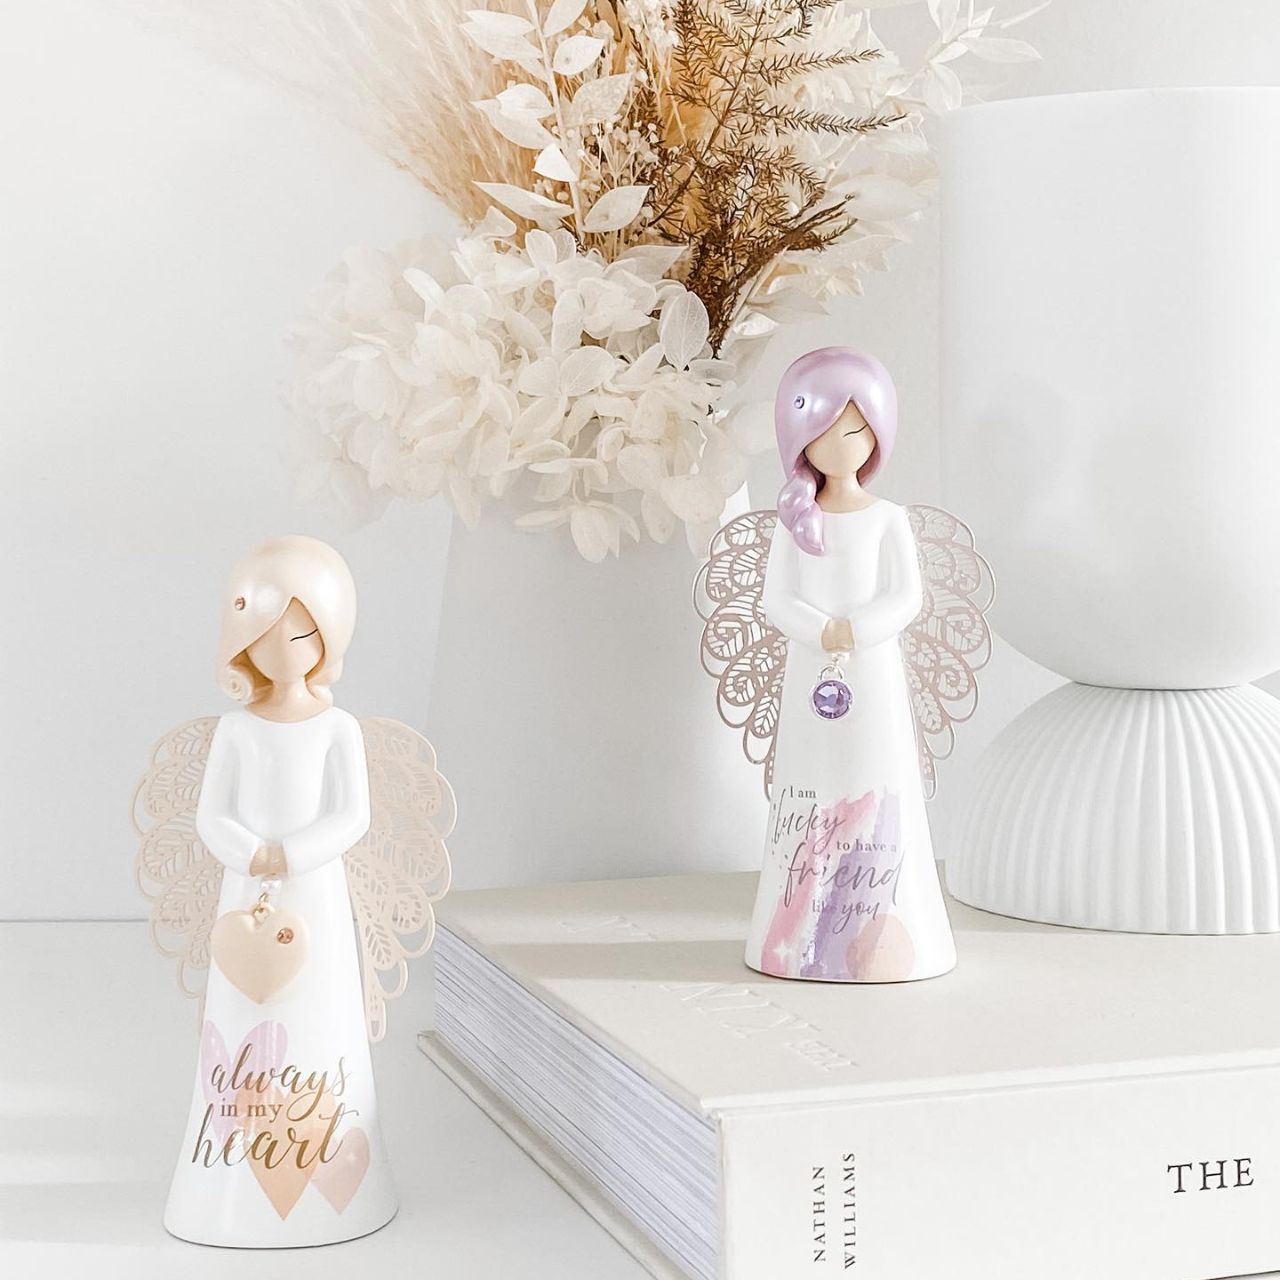 Thank You Angel Figurine - Always In My Heart  "Always in my heart"  Looking for a thoughtful gift that's both beautiful and meaningful? These stunning angels are the perfect way to show someone special just how much they mean to you.